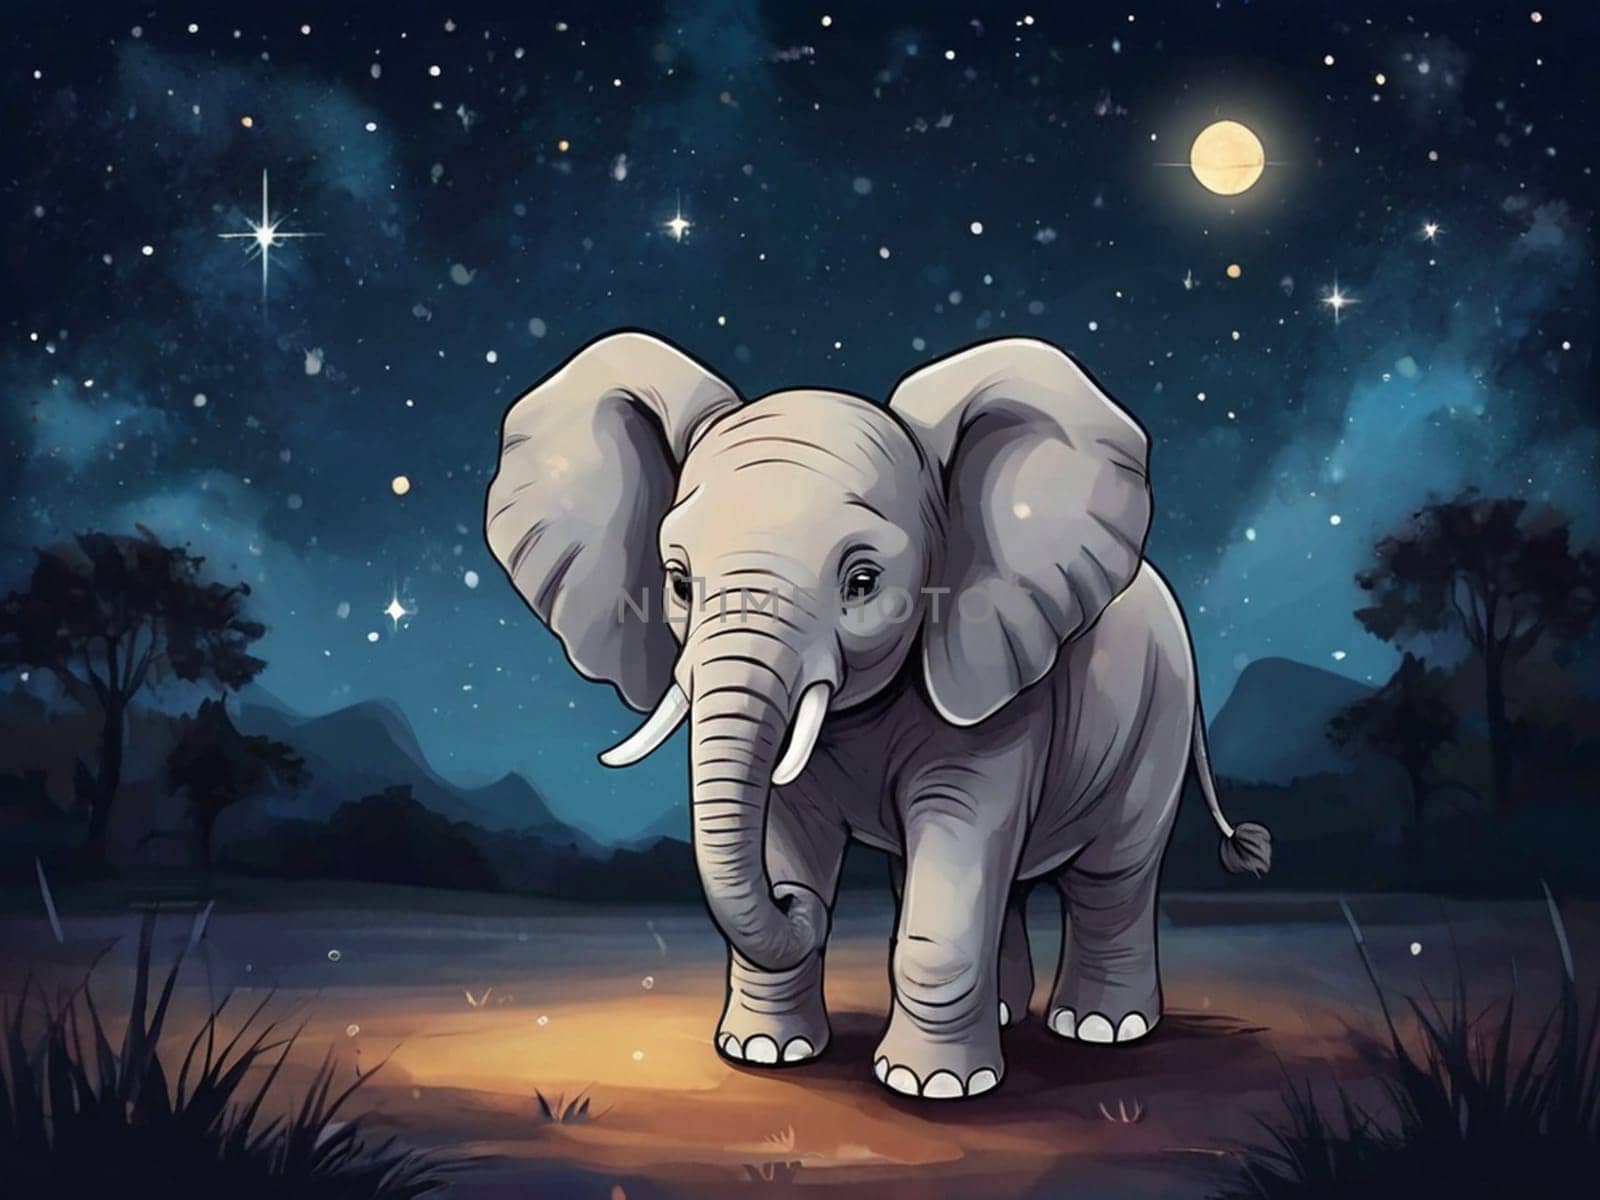 Illustration of a cute baby elephant. by Vailatese46